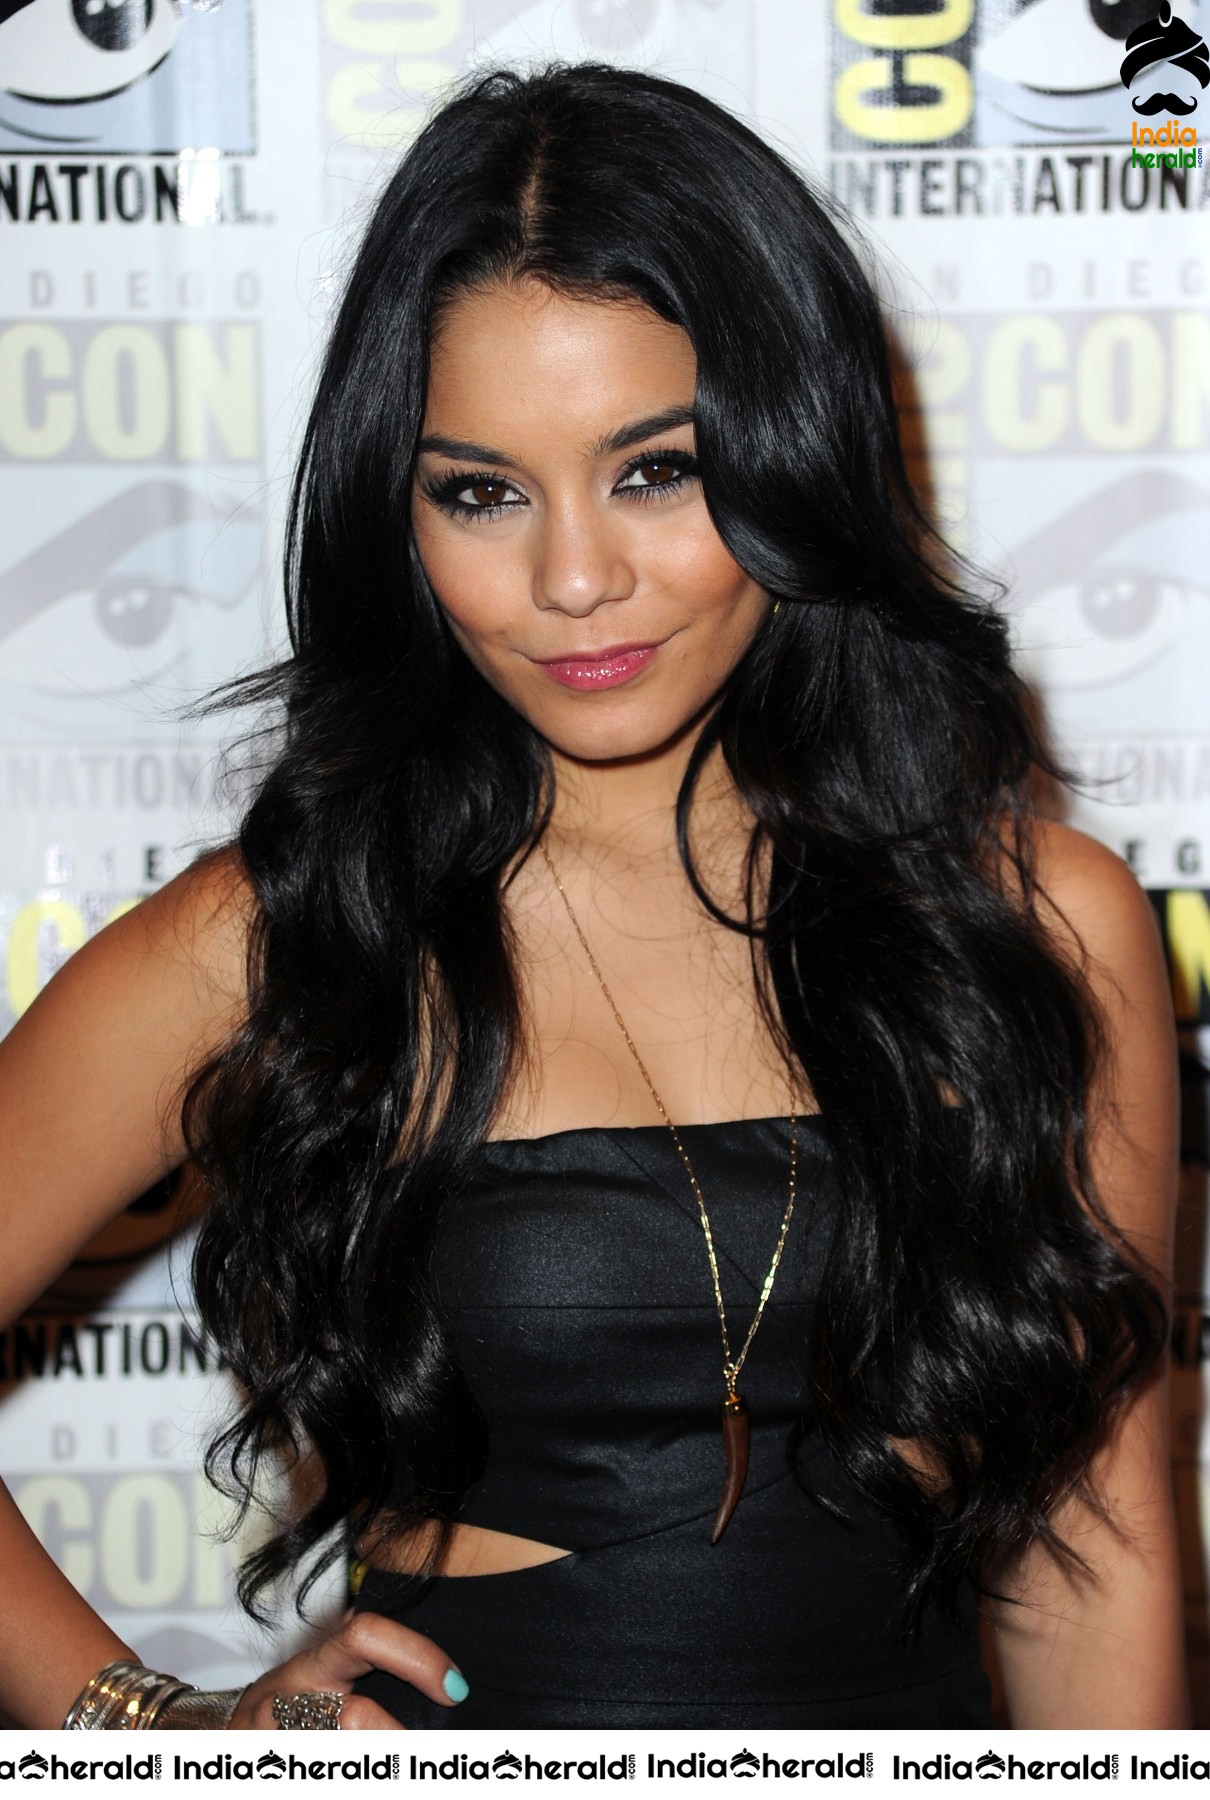 Vanessa Hudgens in a Sexy dress during Comic Con event